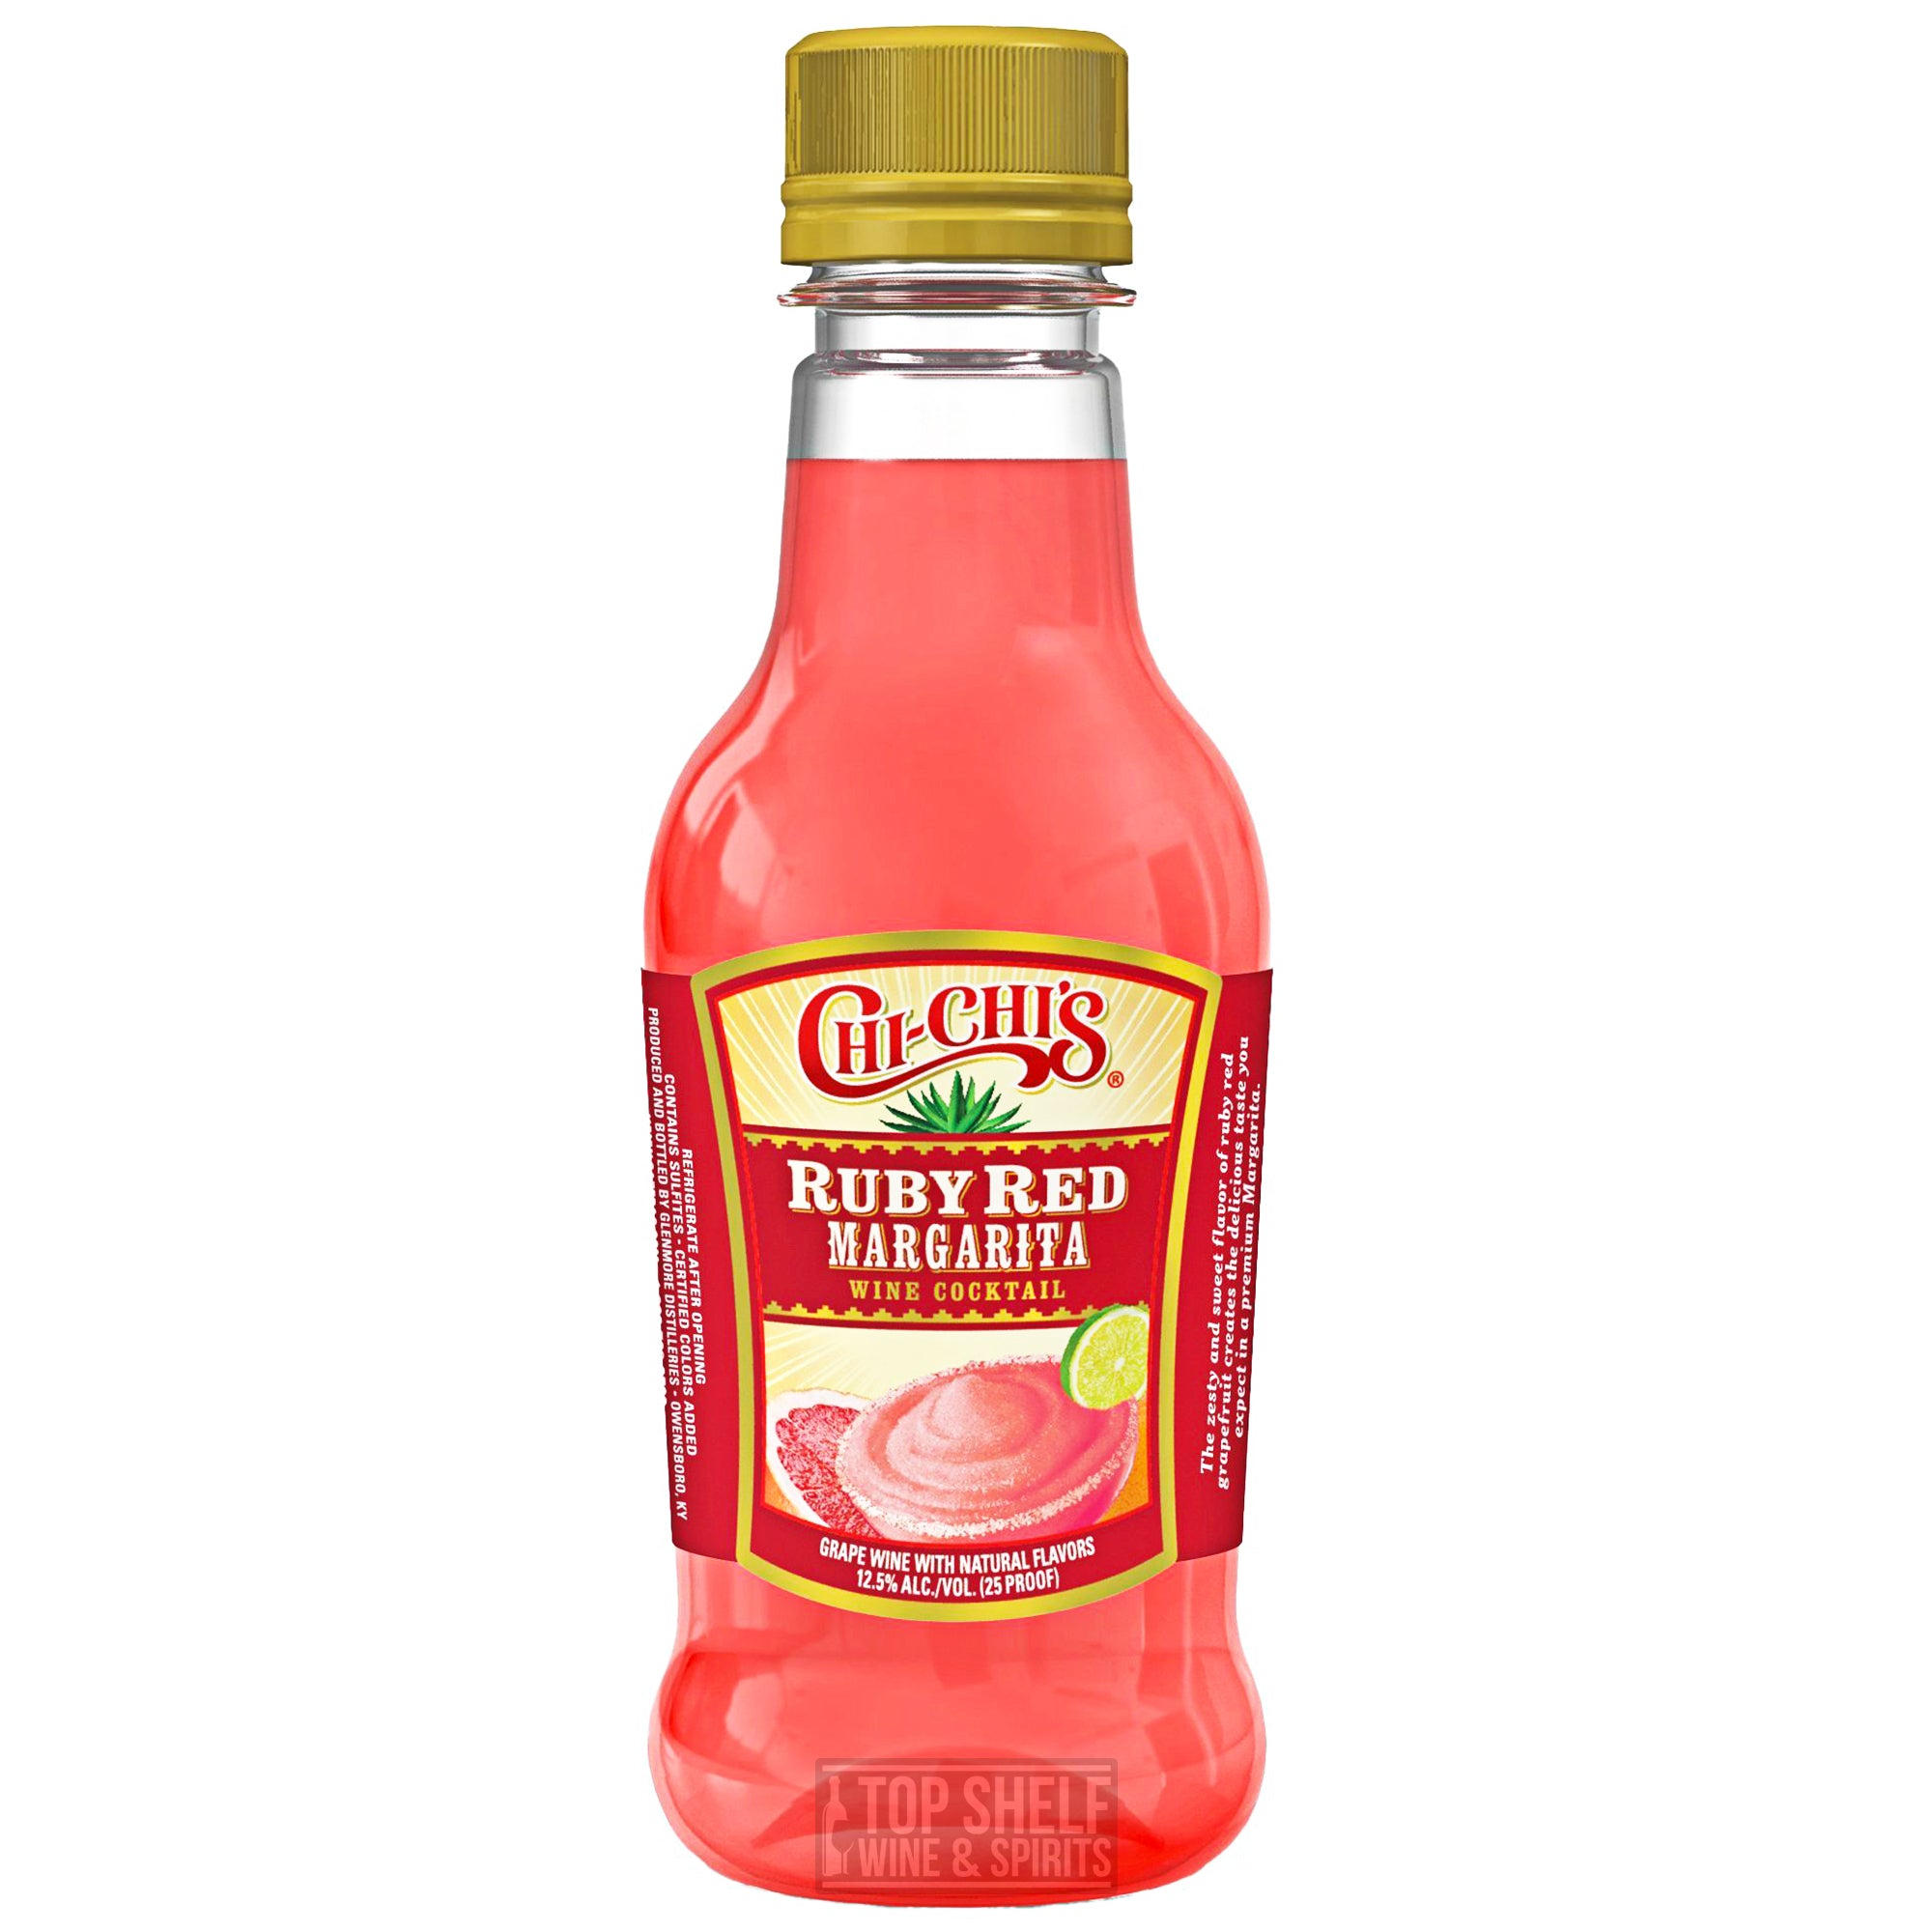 Chi Chi’s Ruby Red Margarita Wine Cocktail 187ml